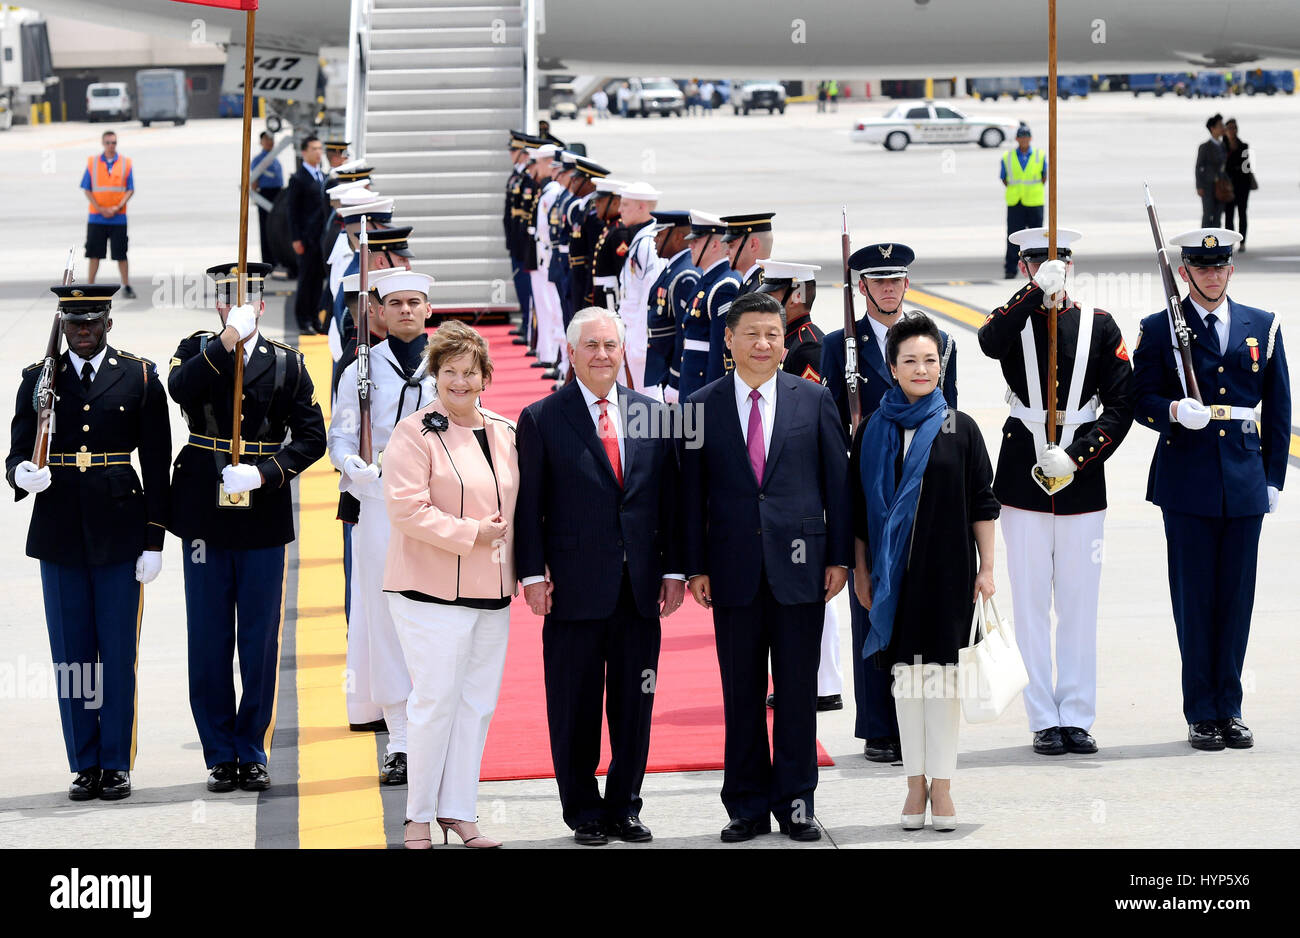 Palm Beach, USA. 6th Apr, 2017. Chinese President Xi Jinping (2nd R, front) and his wife Peng Liyuan (1st R, front) are welcomed by U.S. Secretary of State Rex Tillerson (2nd L, front) and his wife upon their arrival at Palm Beach International Airport in Florida, the United States, April 6, 2017. Xi arrived here for the first meeting with U.S. President Donald Trump. Credit: Wu Xiaoling/Xinhua/Alamy Live News Stock Photo